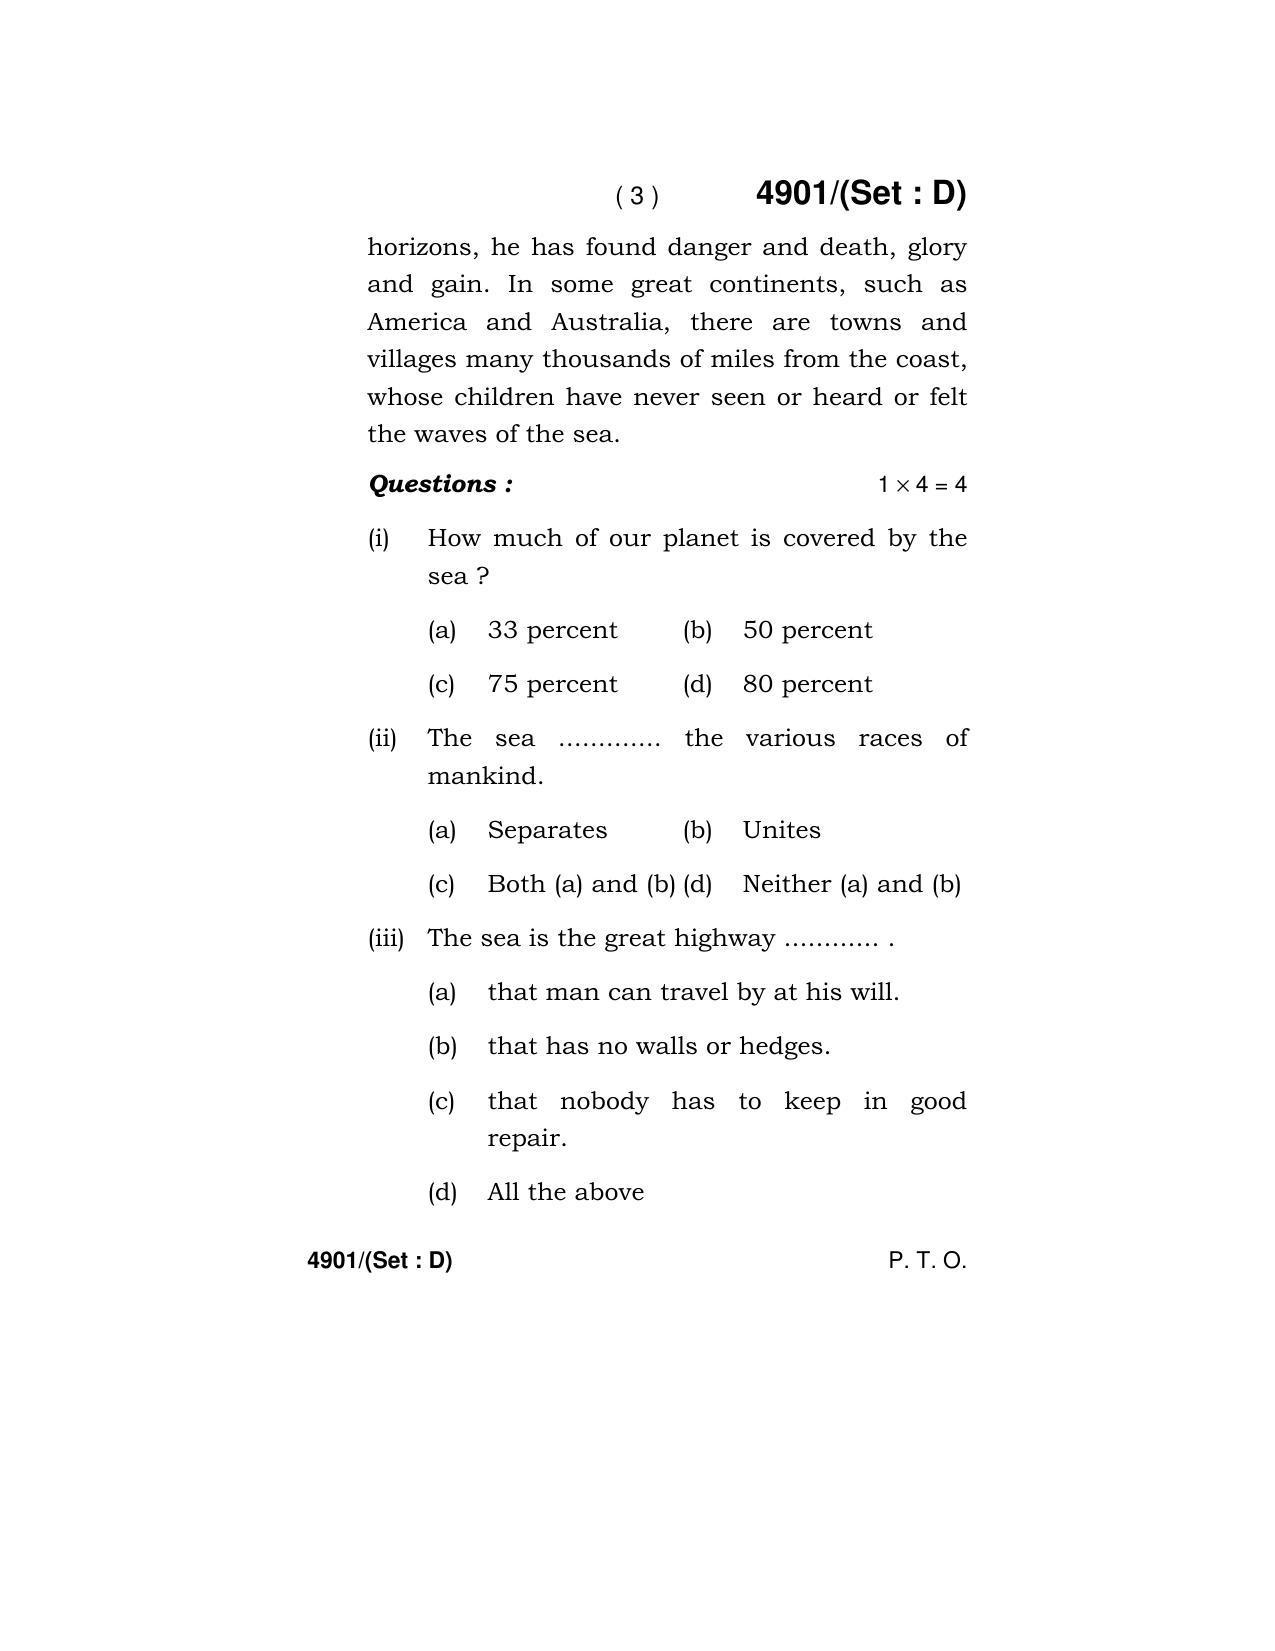 Haryana Board HBSE Class 12 English Core 2020 Question Paper - Page 51